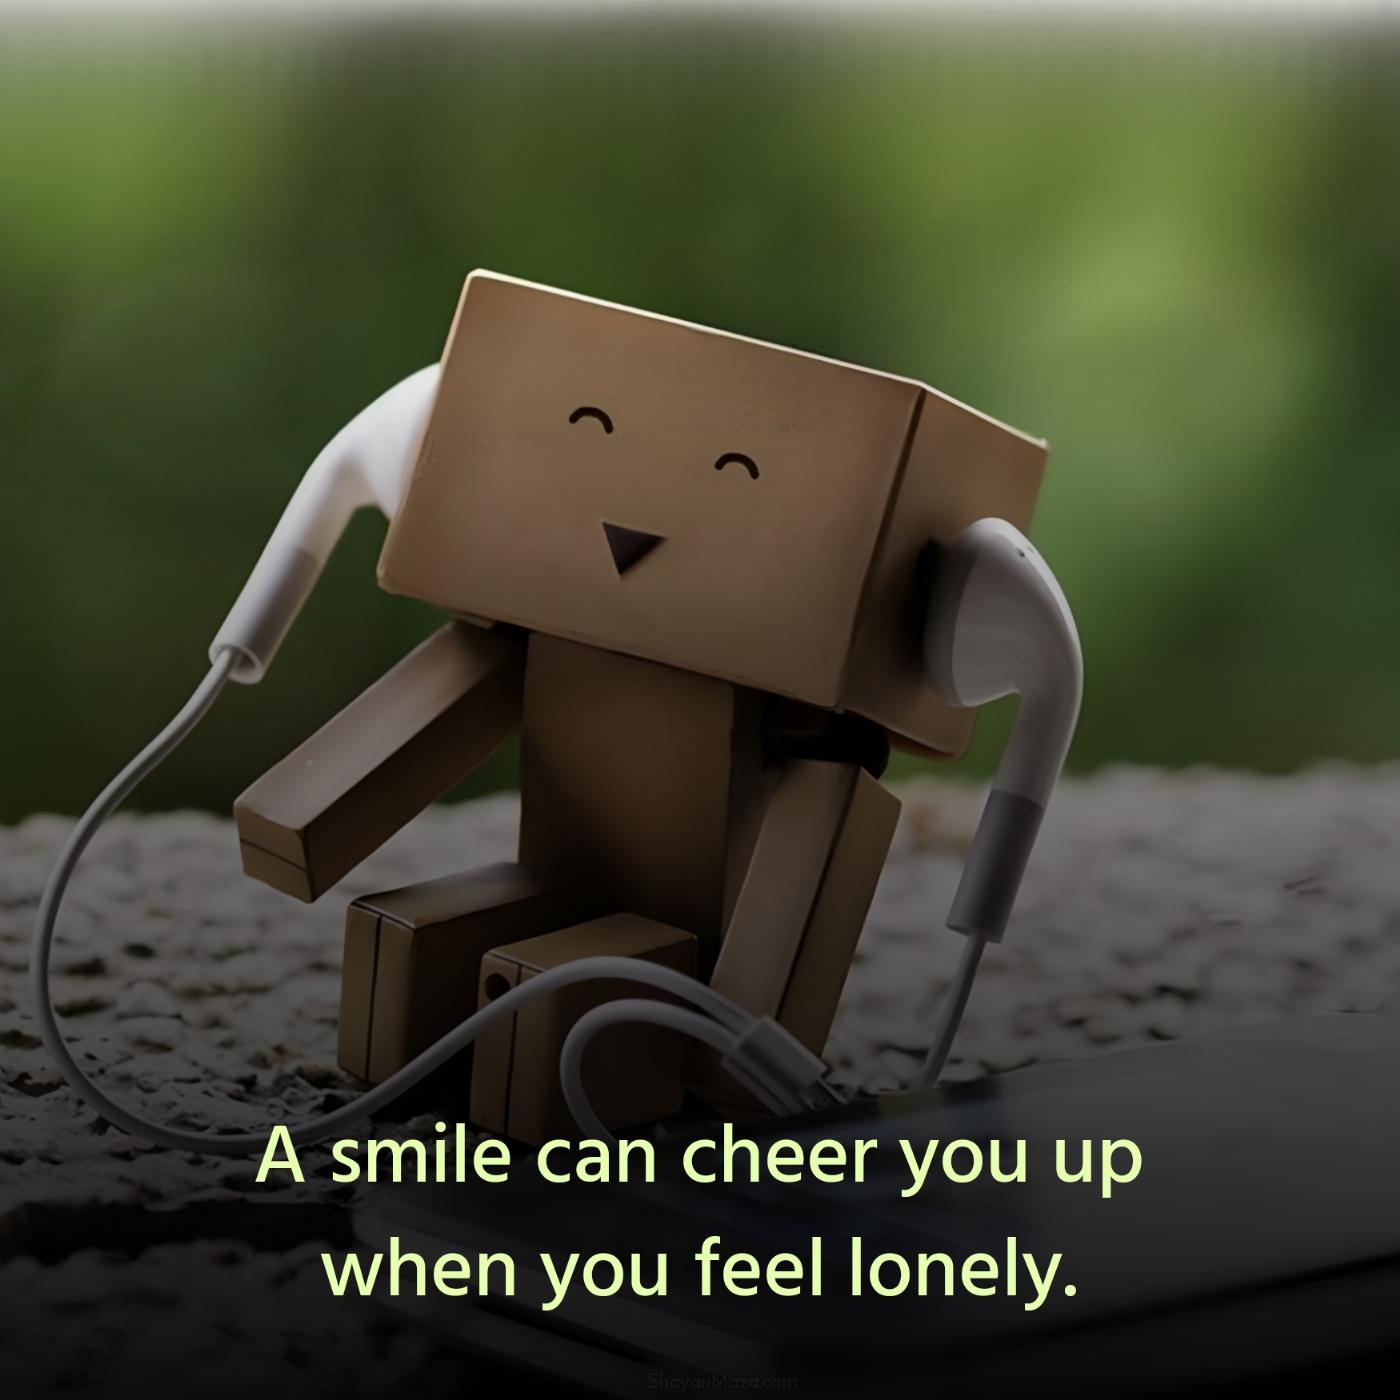 A smile can cheer you up when you feel lonely